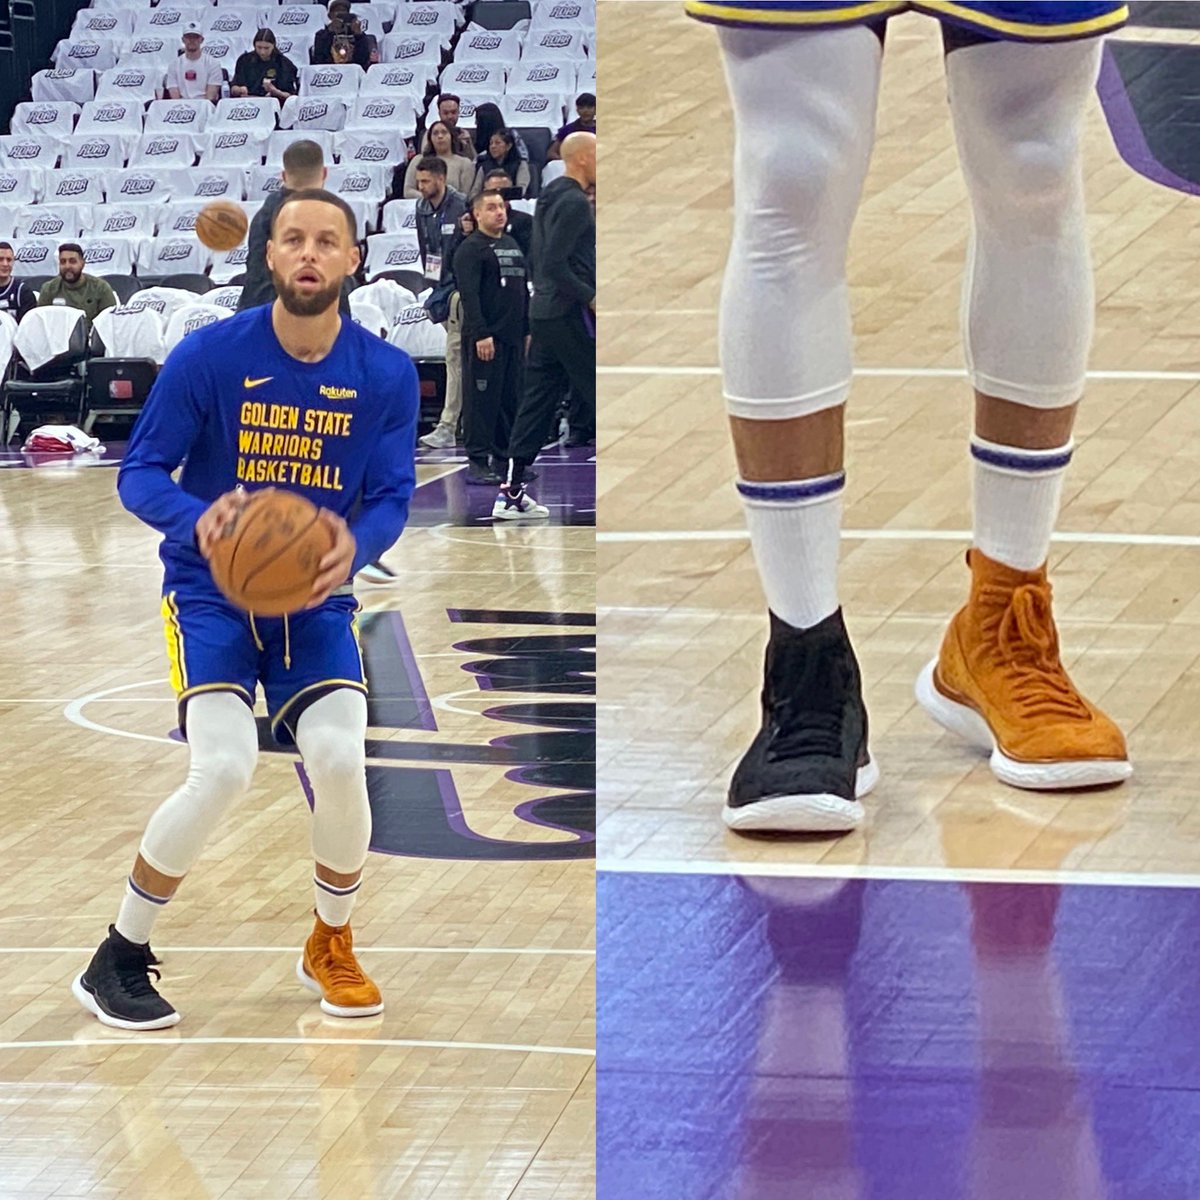 Stephen Curry with a strong shoe game. #Warriors #Kings #NBAPlayINTournament #DubNation @nbcbayarea